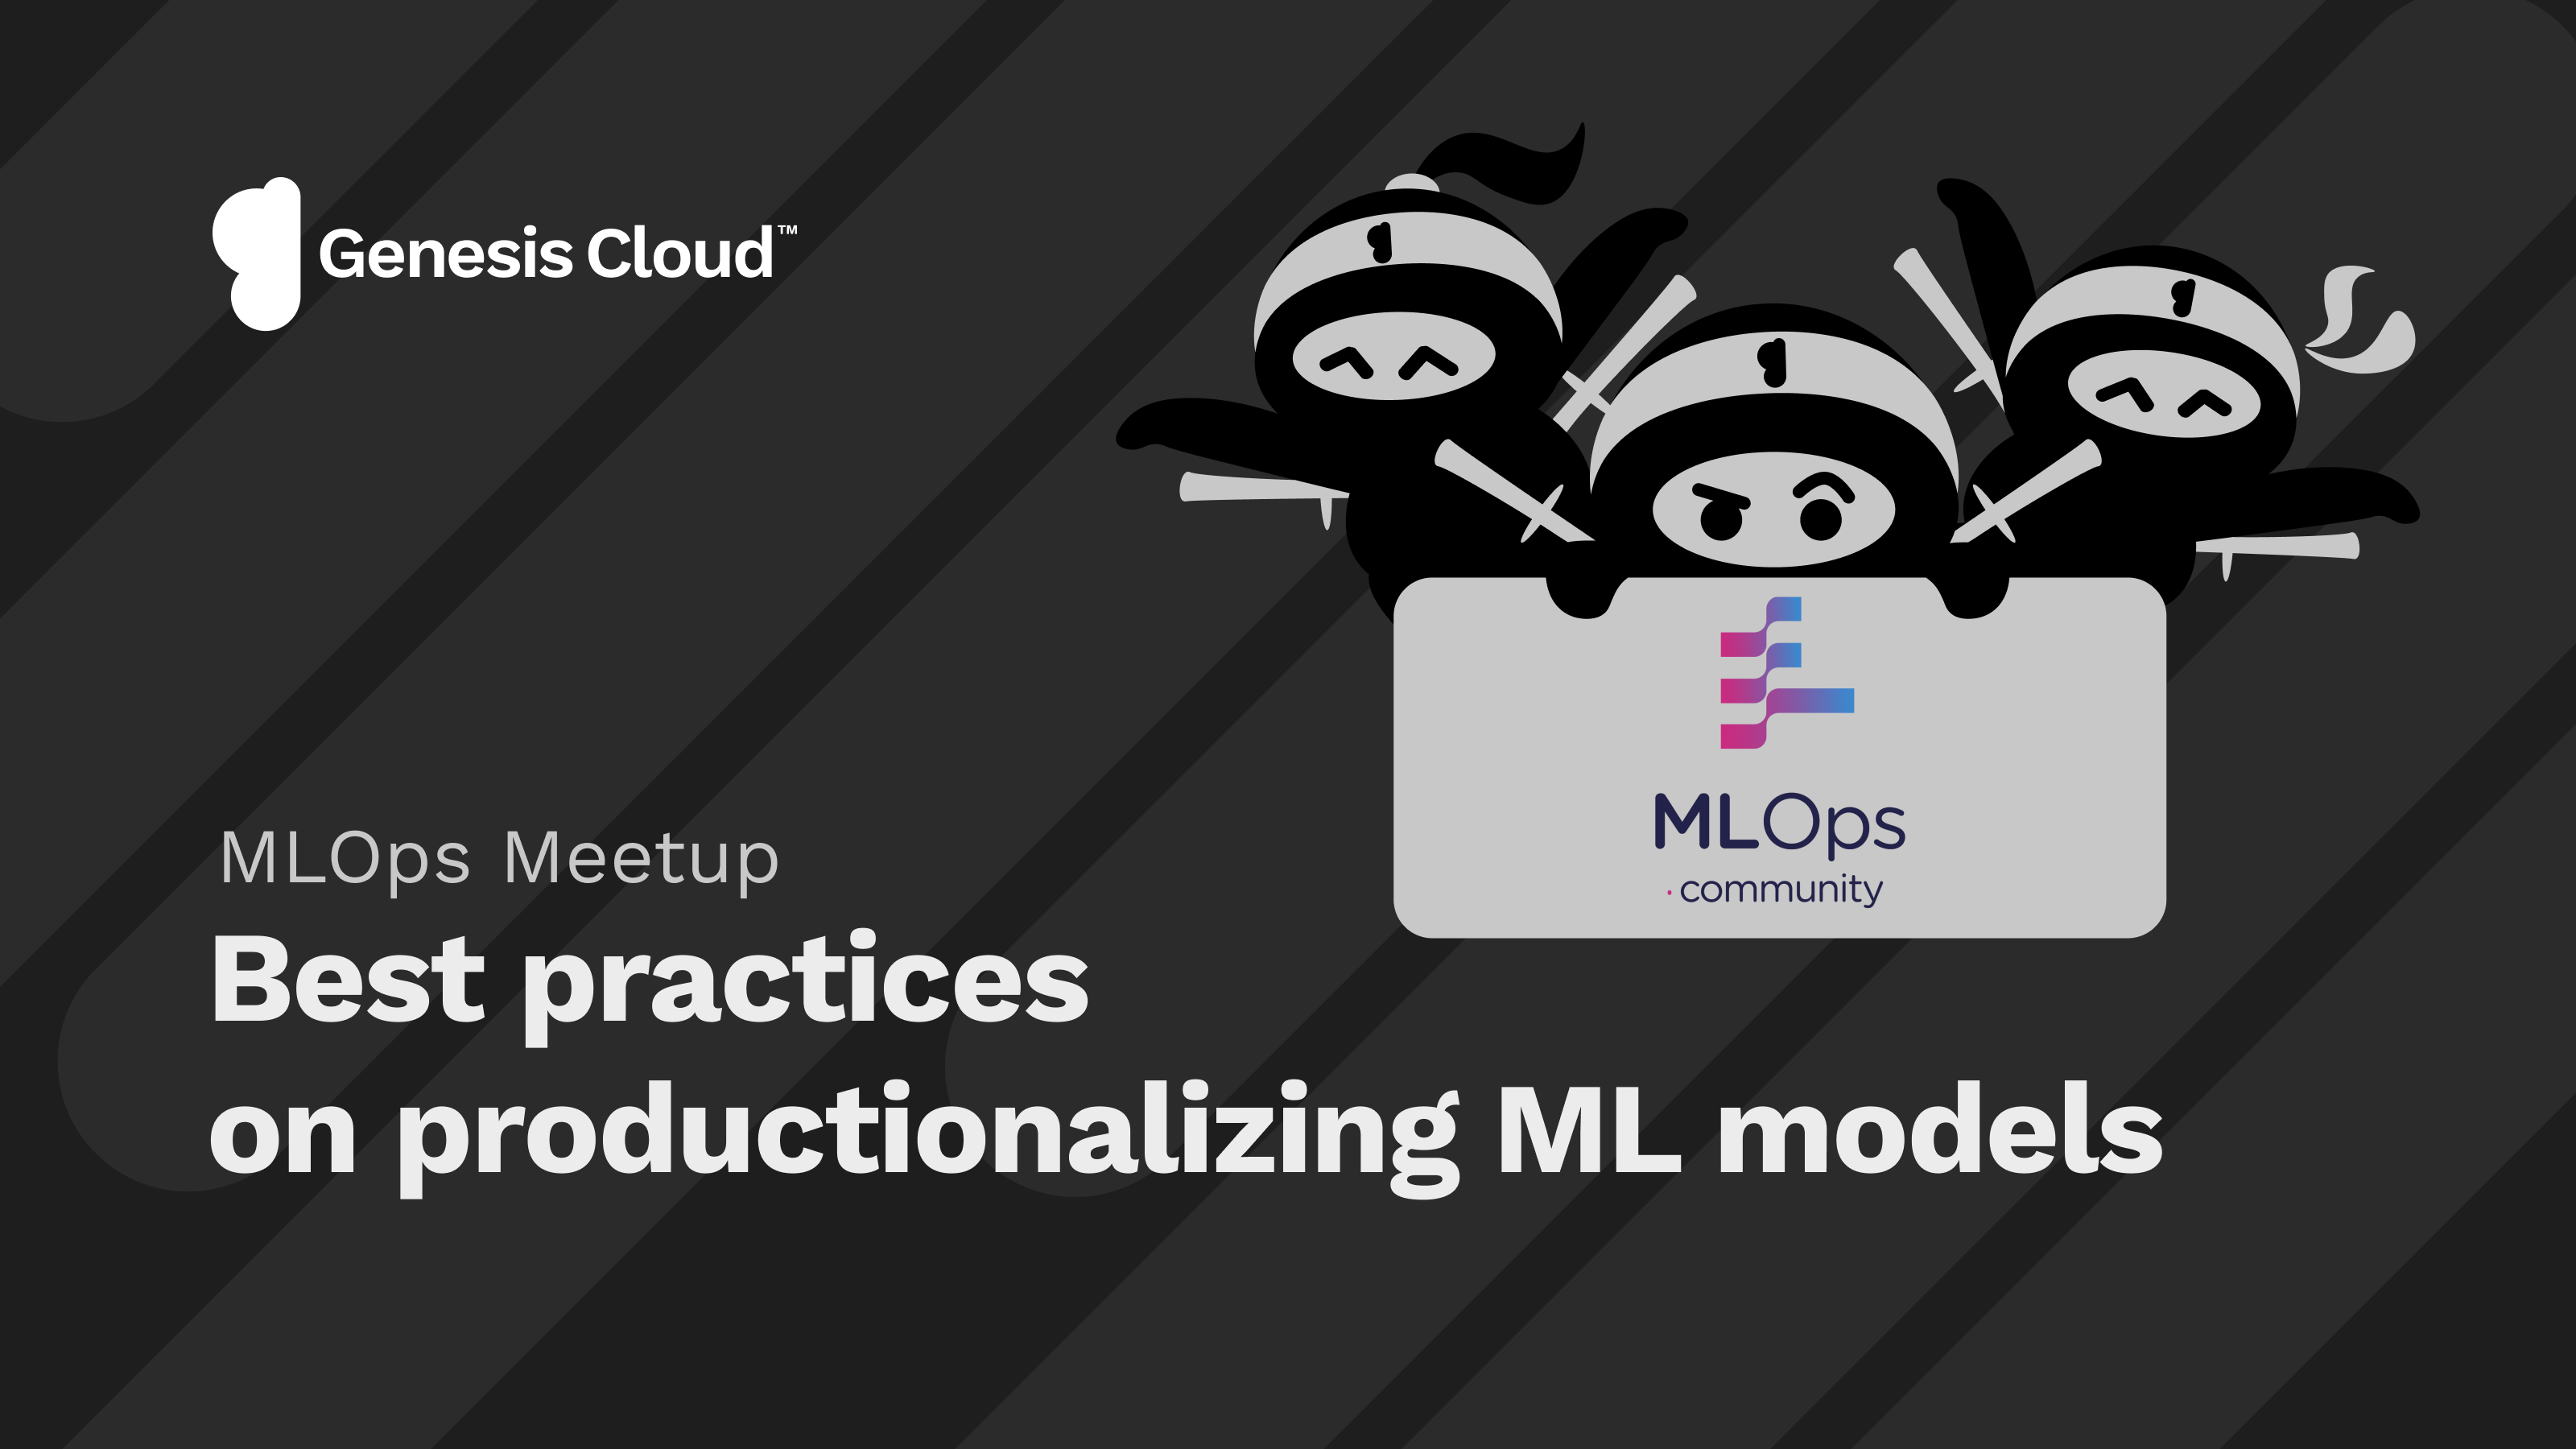 Best practices on productionalizing ML models